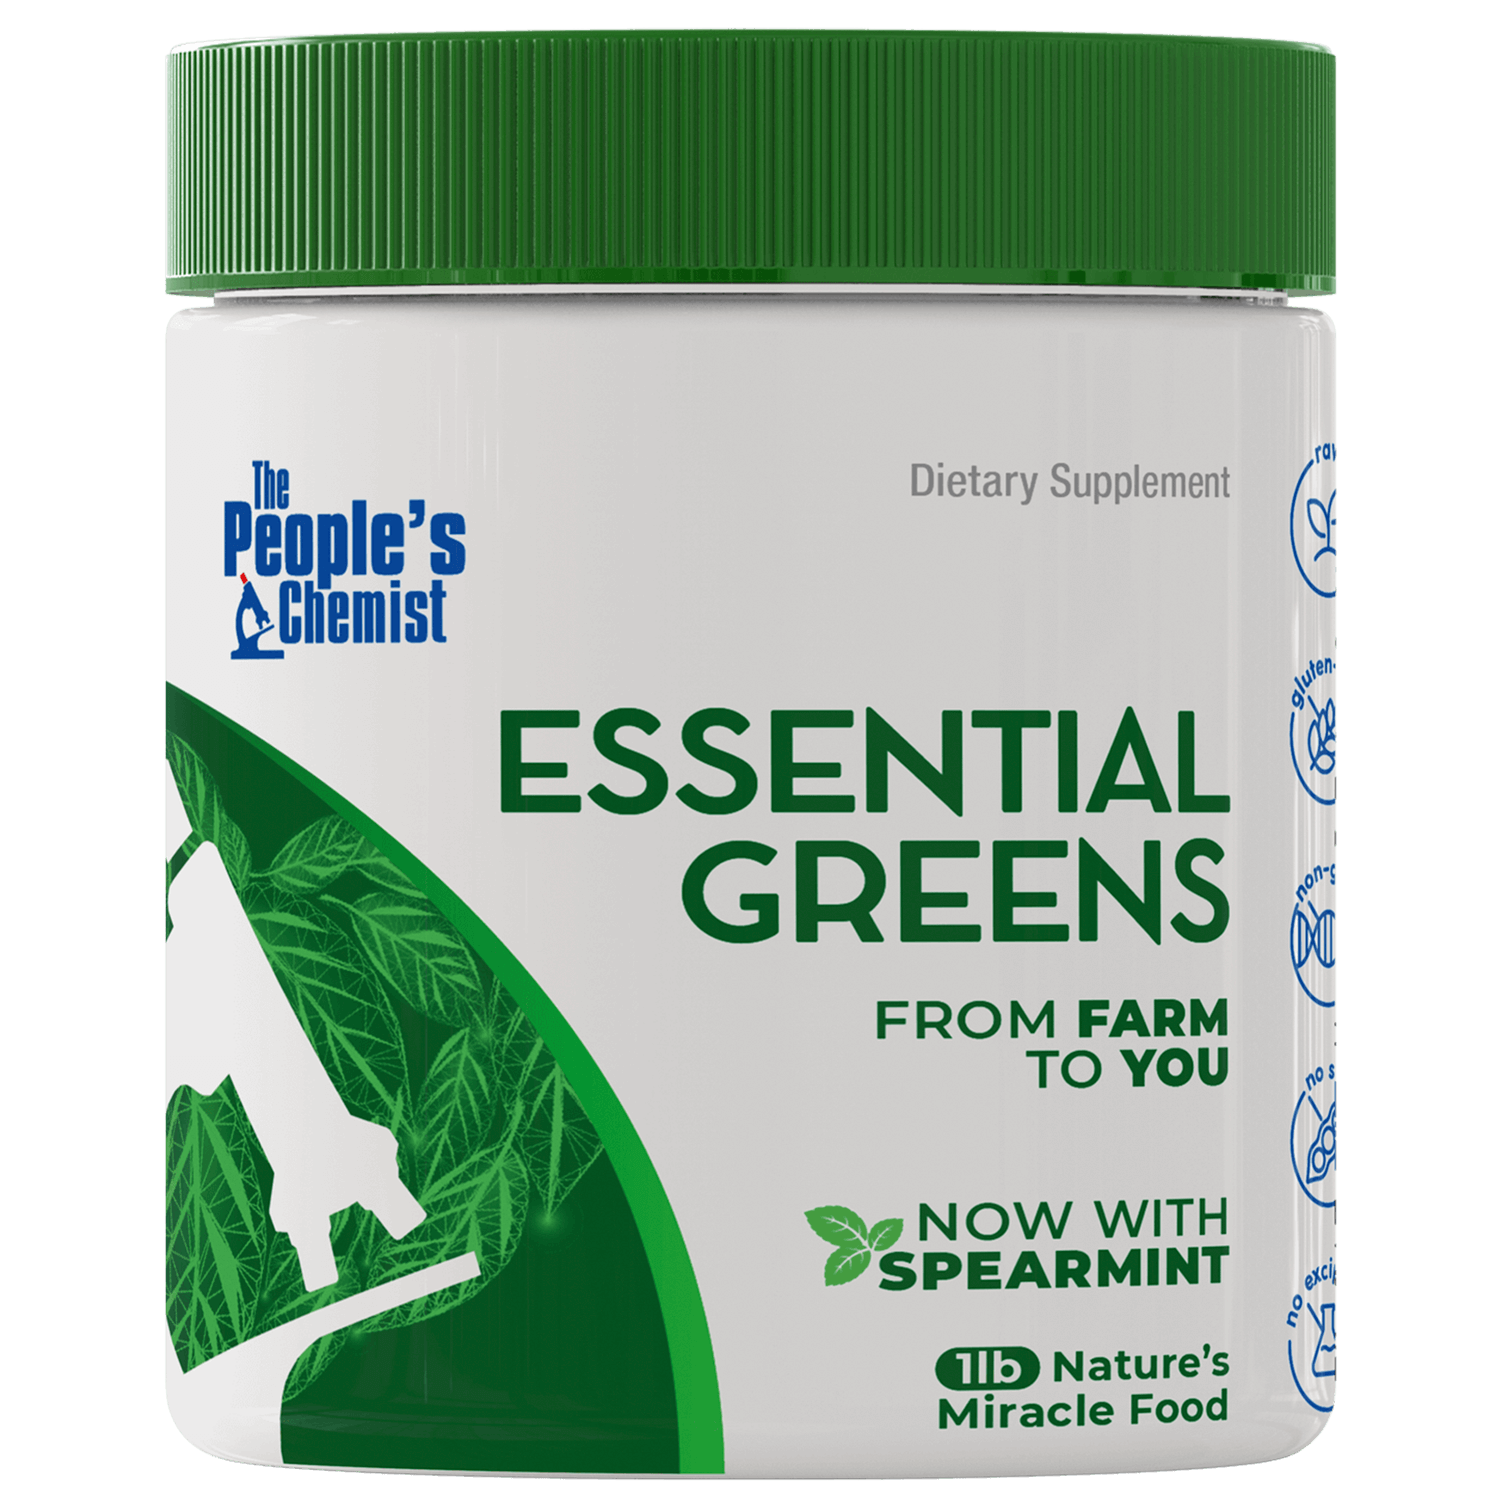 Essential Greens - The People's Chemist